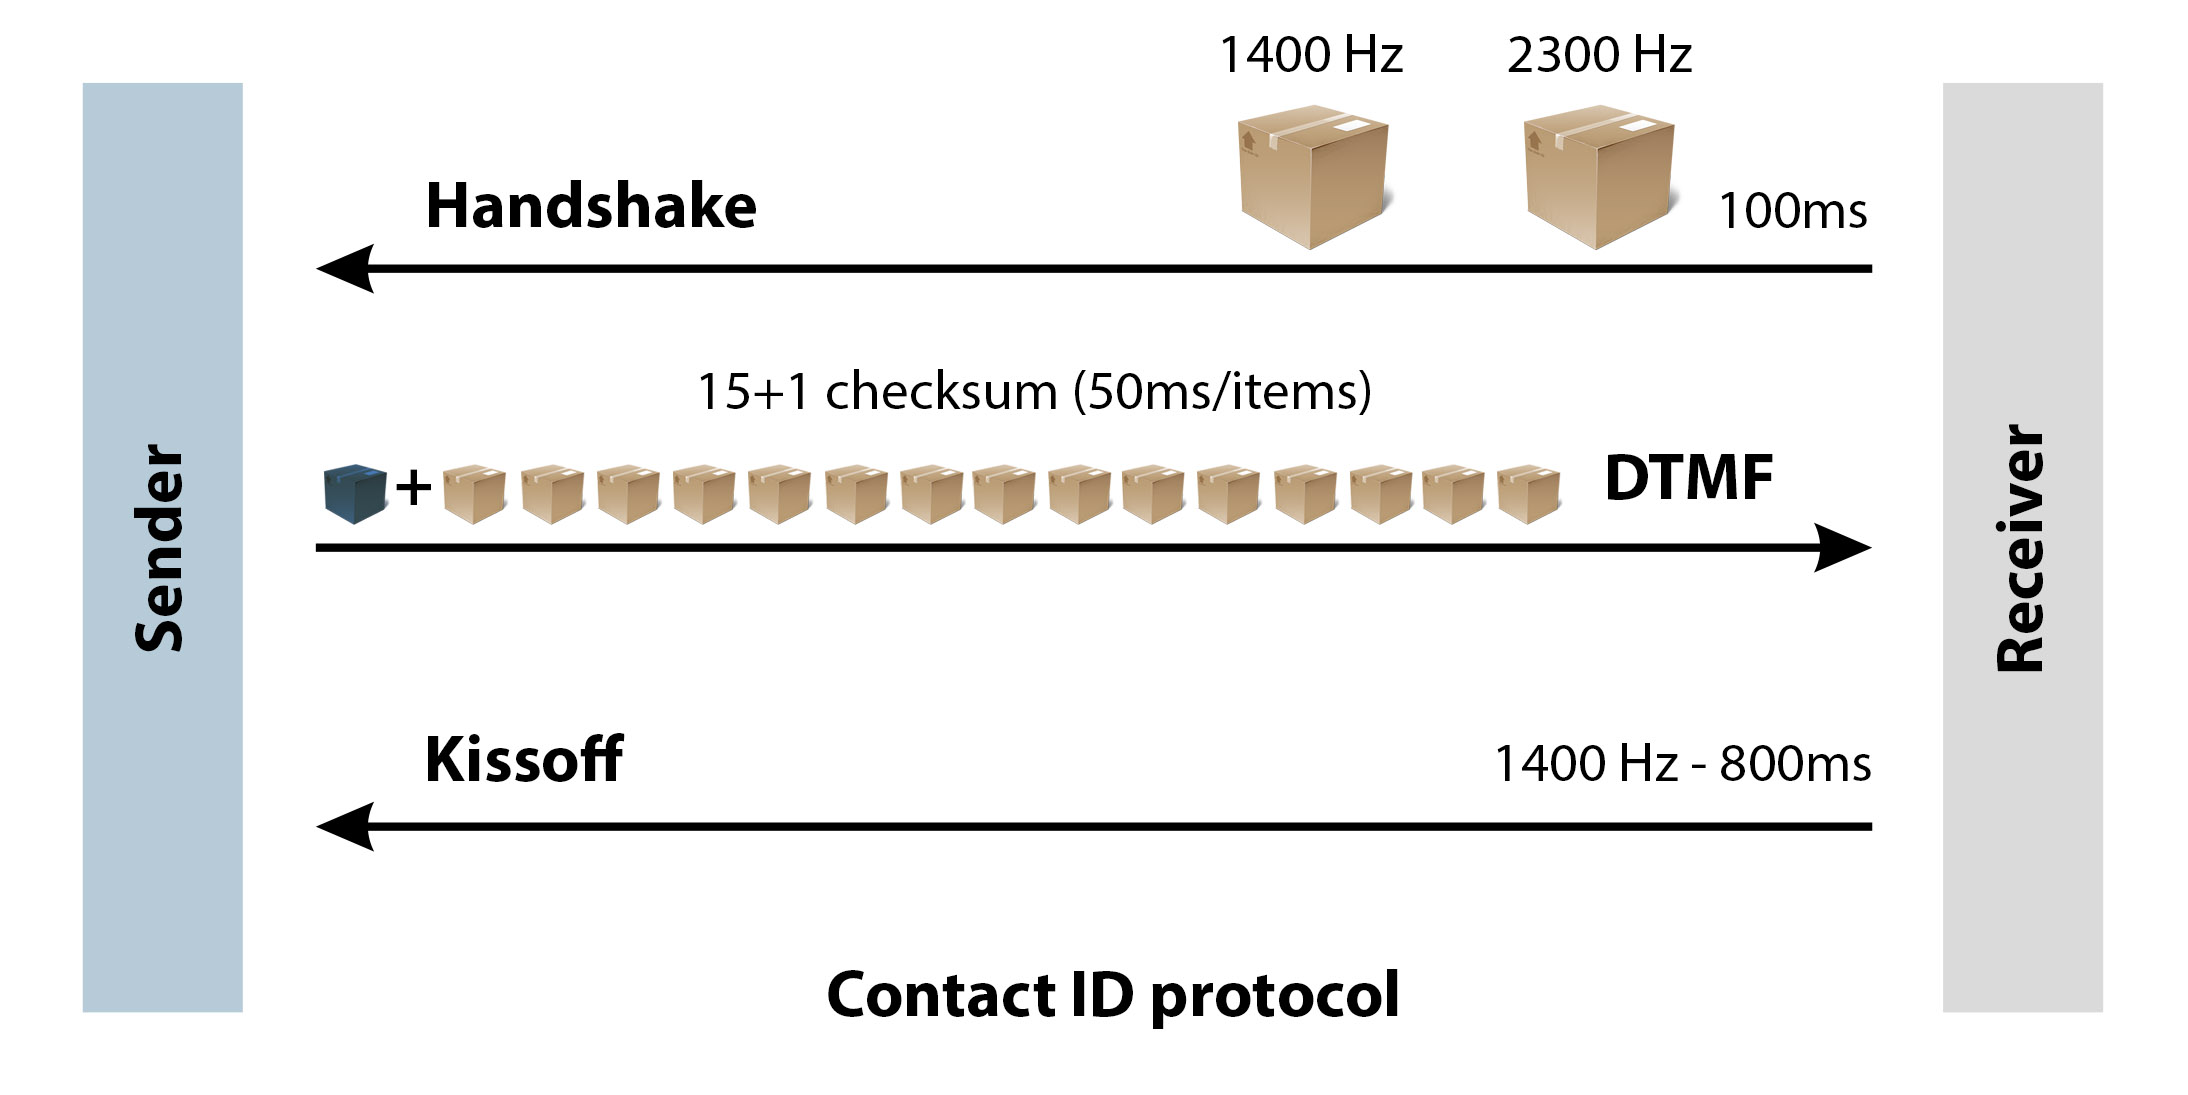 the communication process of contact id protocol